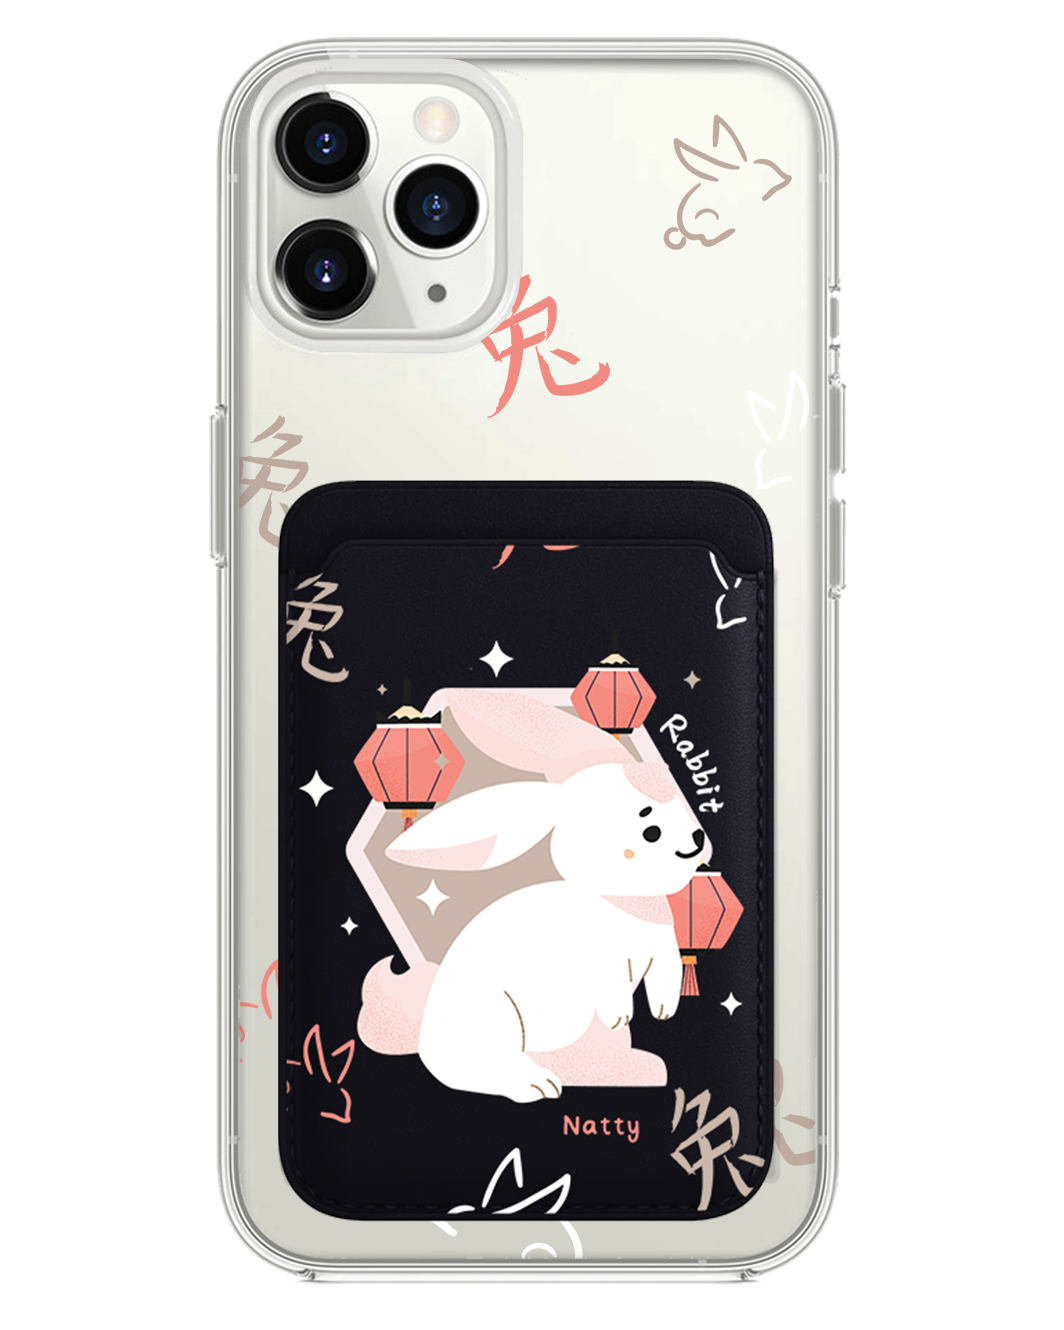 iPhone Magnetic Wallet Case - Rabbit (Chinese Zodiac / Shio)